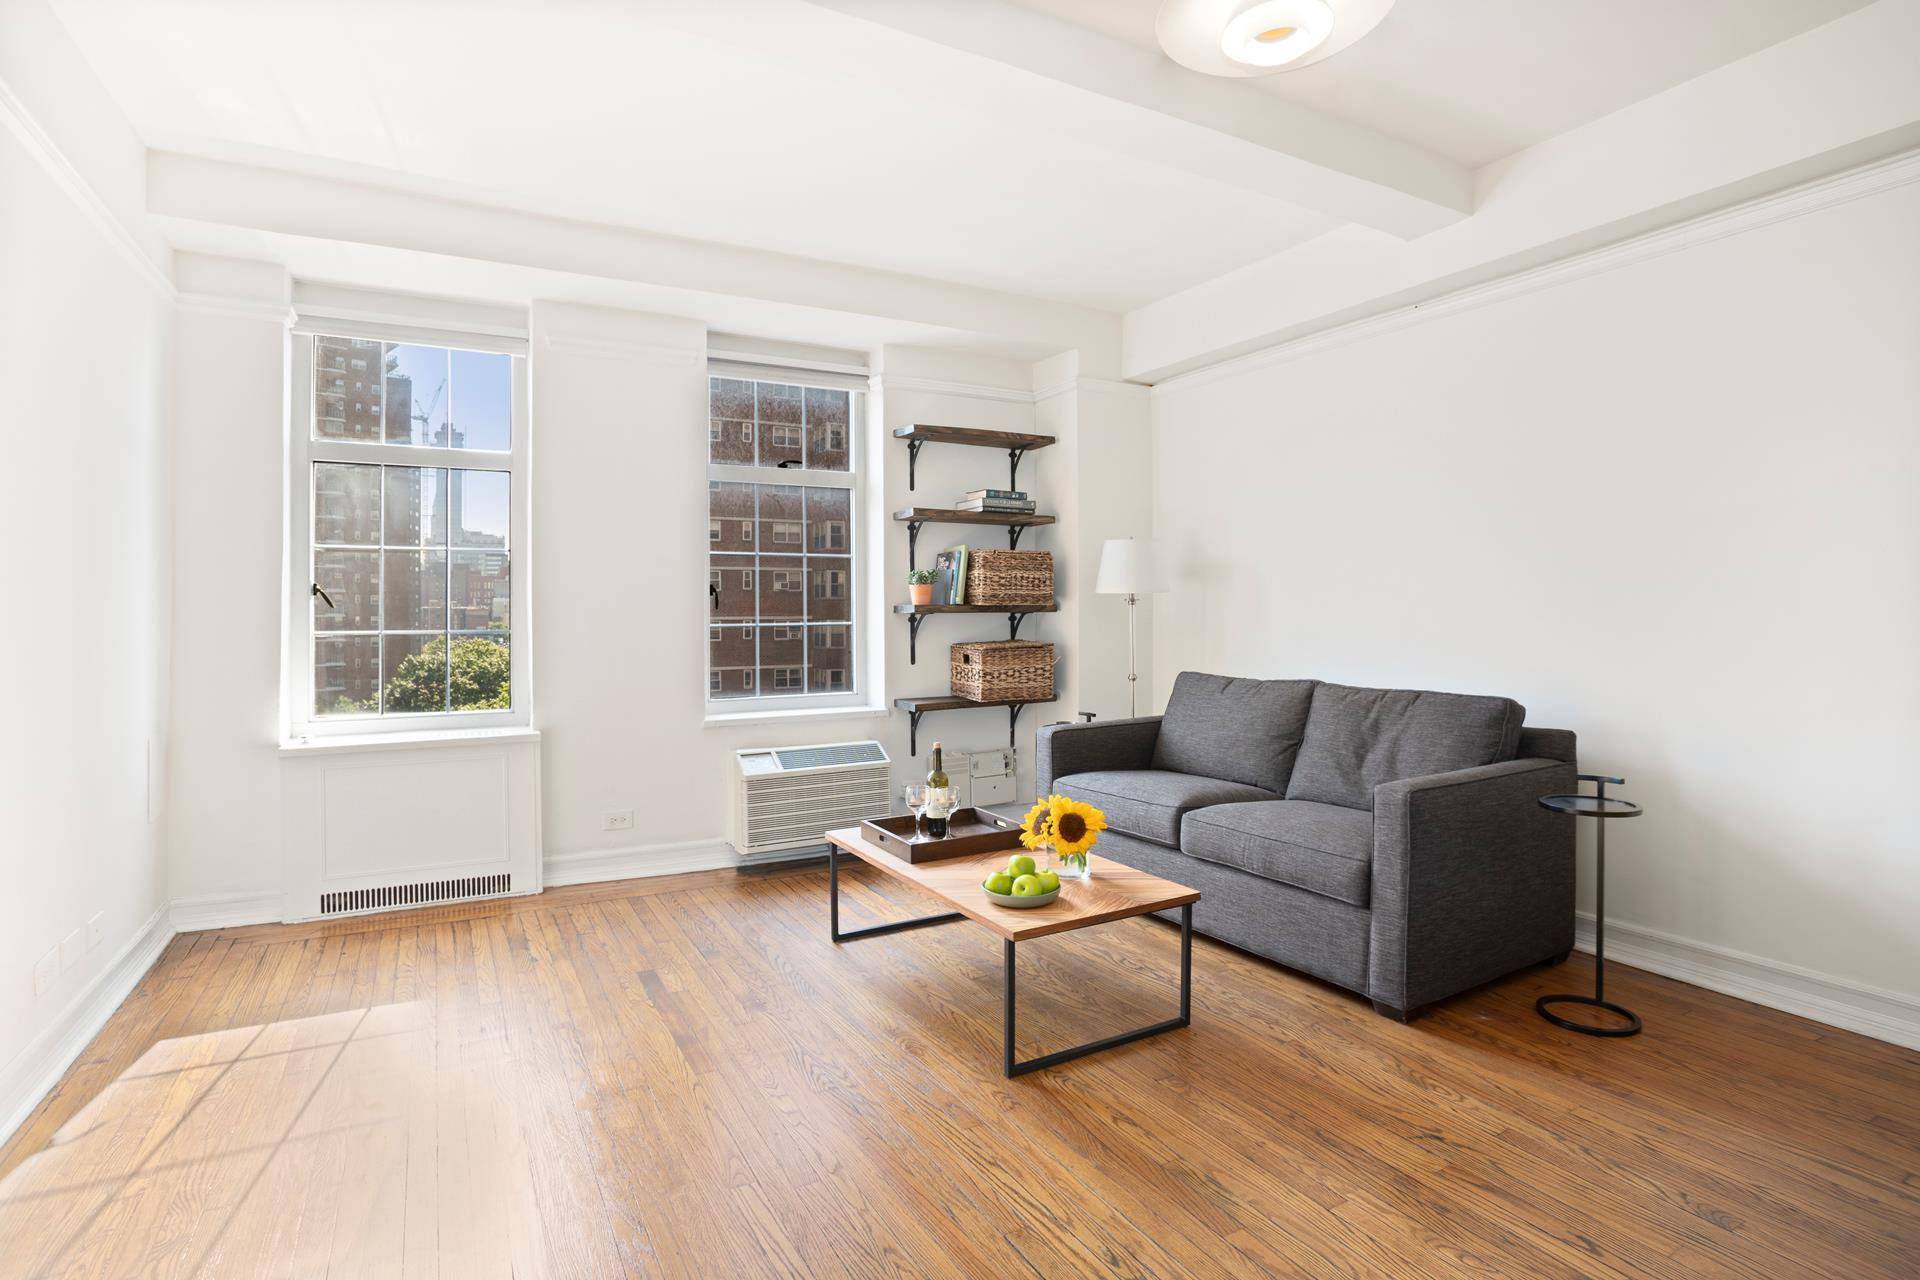 Move right in to this bright, comfortable pre war studio with stunning Eastern facing exposures to full grown trees and views of iconic Manhattan skyscrapers.